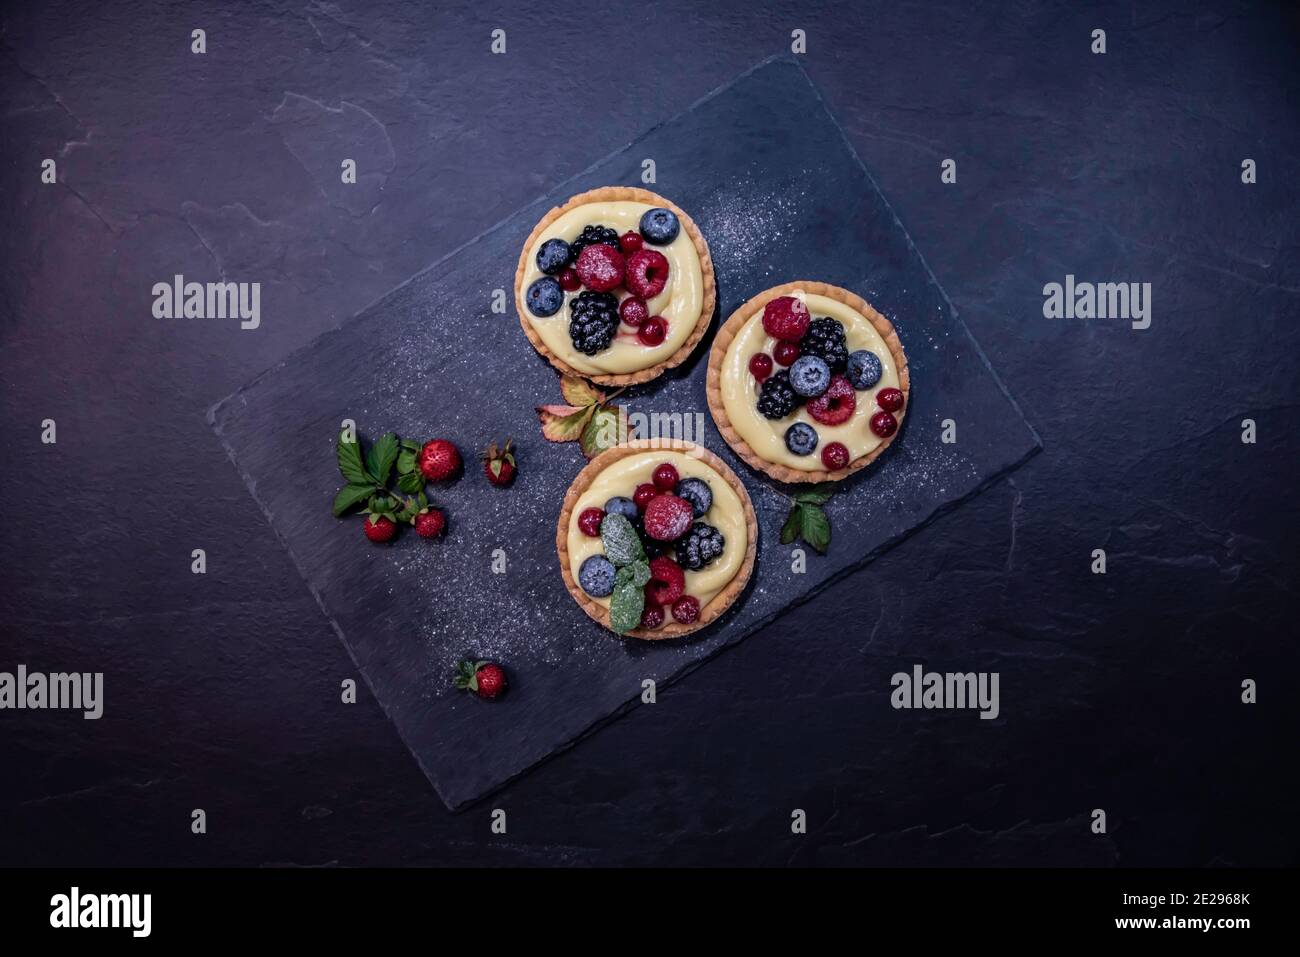 Top down view of three pie cakes with berry fruits and vanilla cream on a slate stone serving platter surrounded by strawberries. Stock Photo